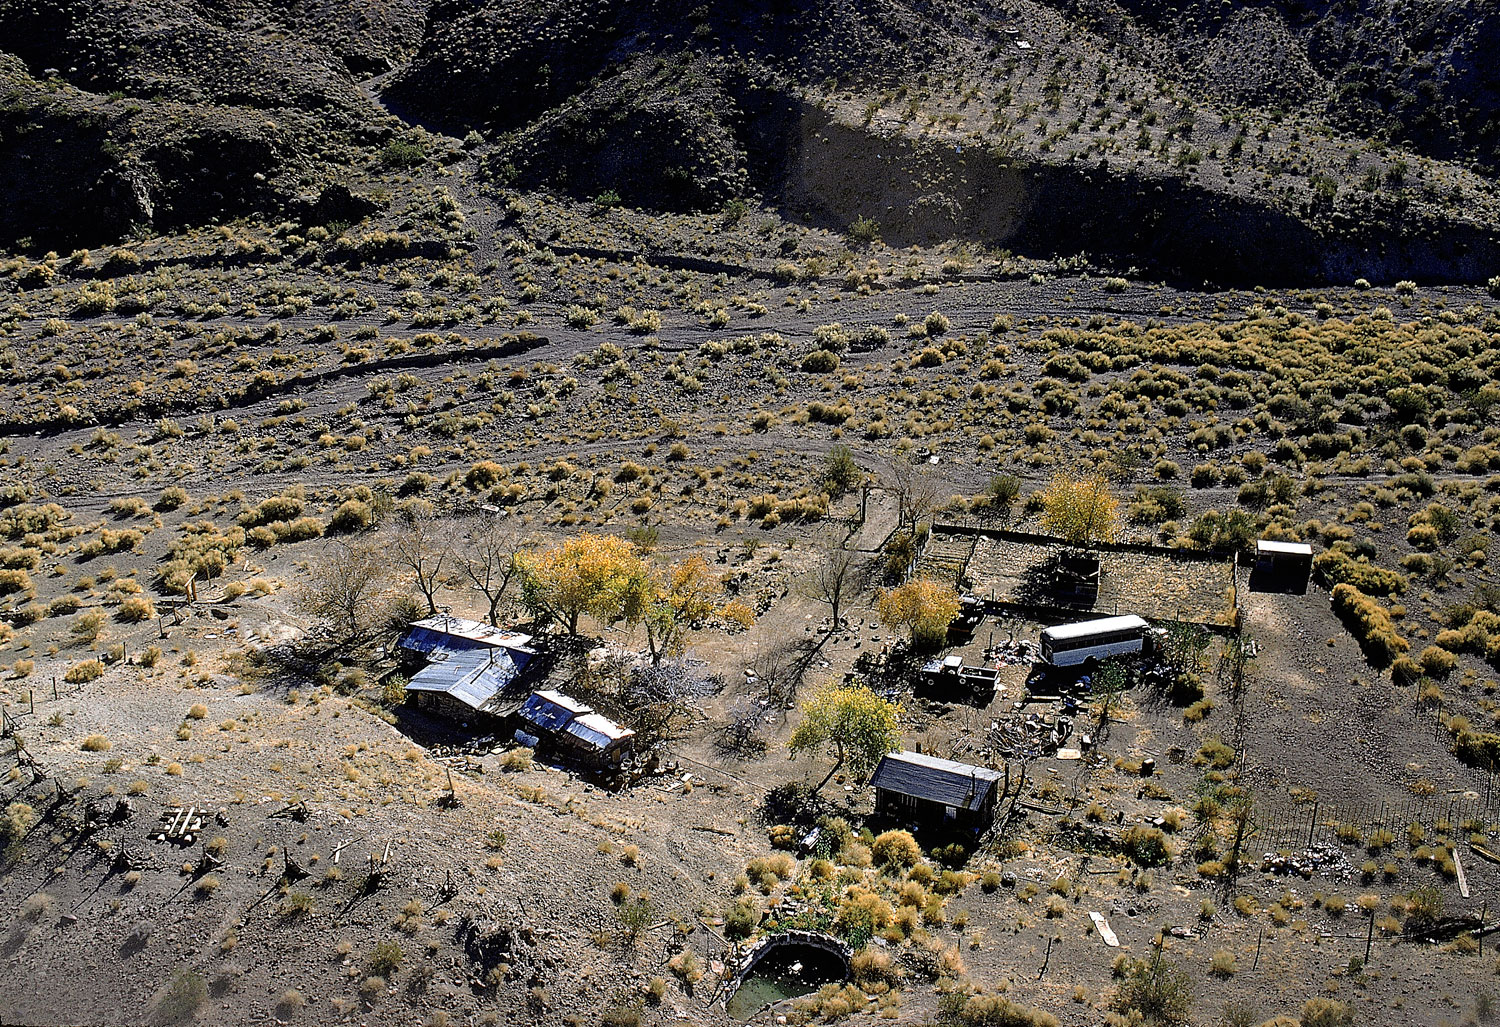 Aerial view of Barker Ranch, where Charles Manson was caught (hiding in a cabinet beneath a sink) in October 1969.